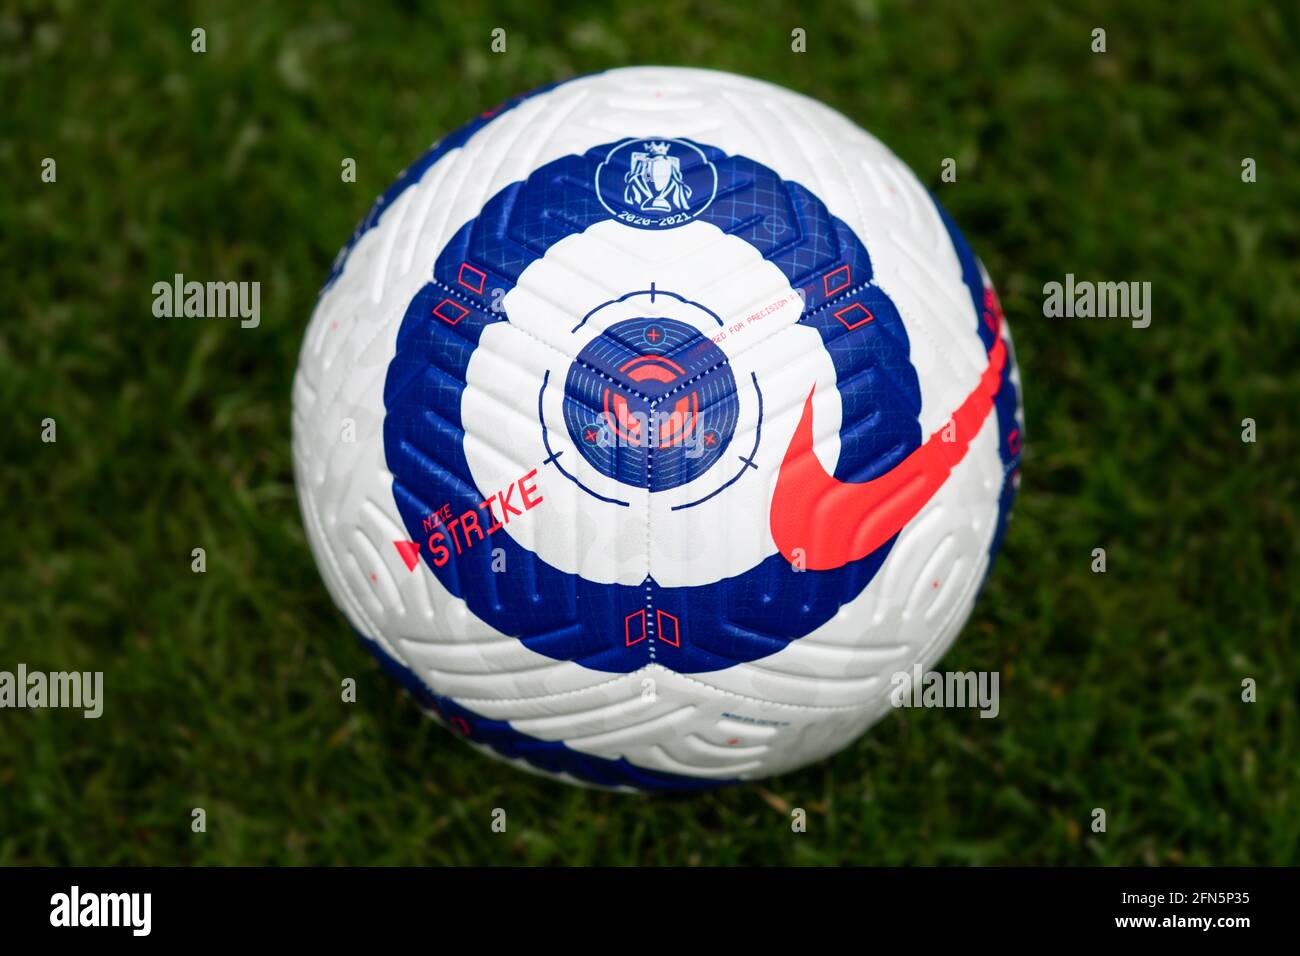 Close up of Nike Flight football for the Premier League 2020/21 Stock Photo